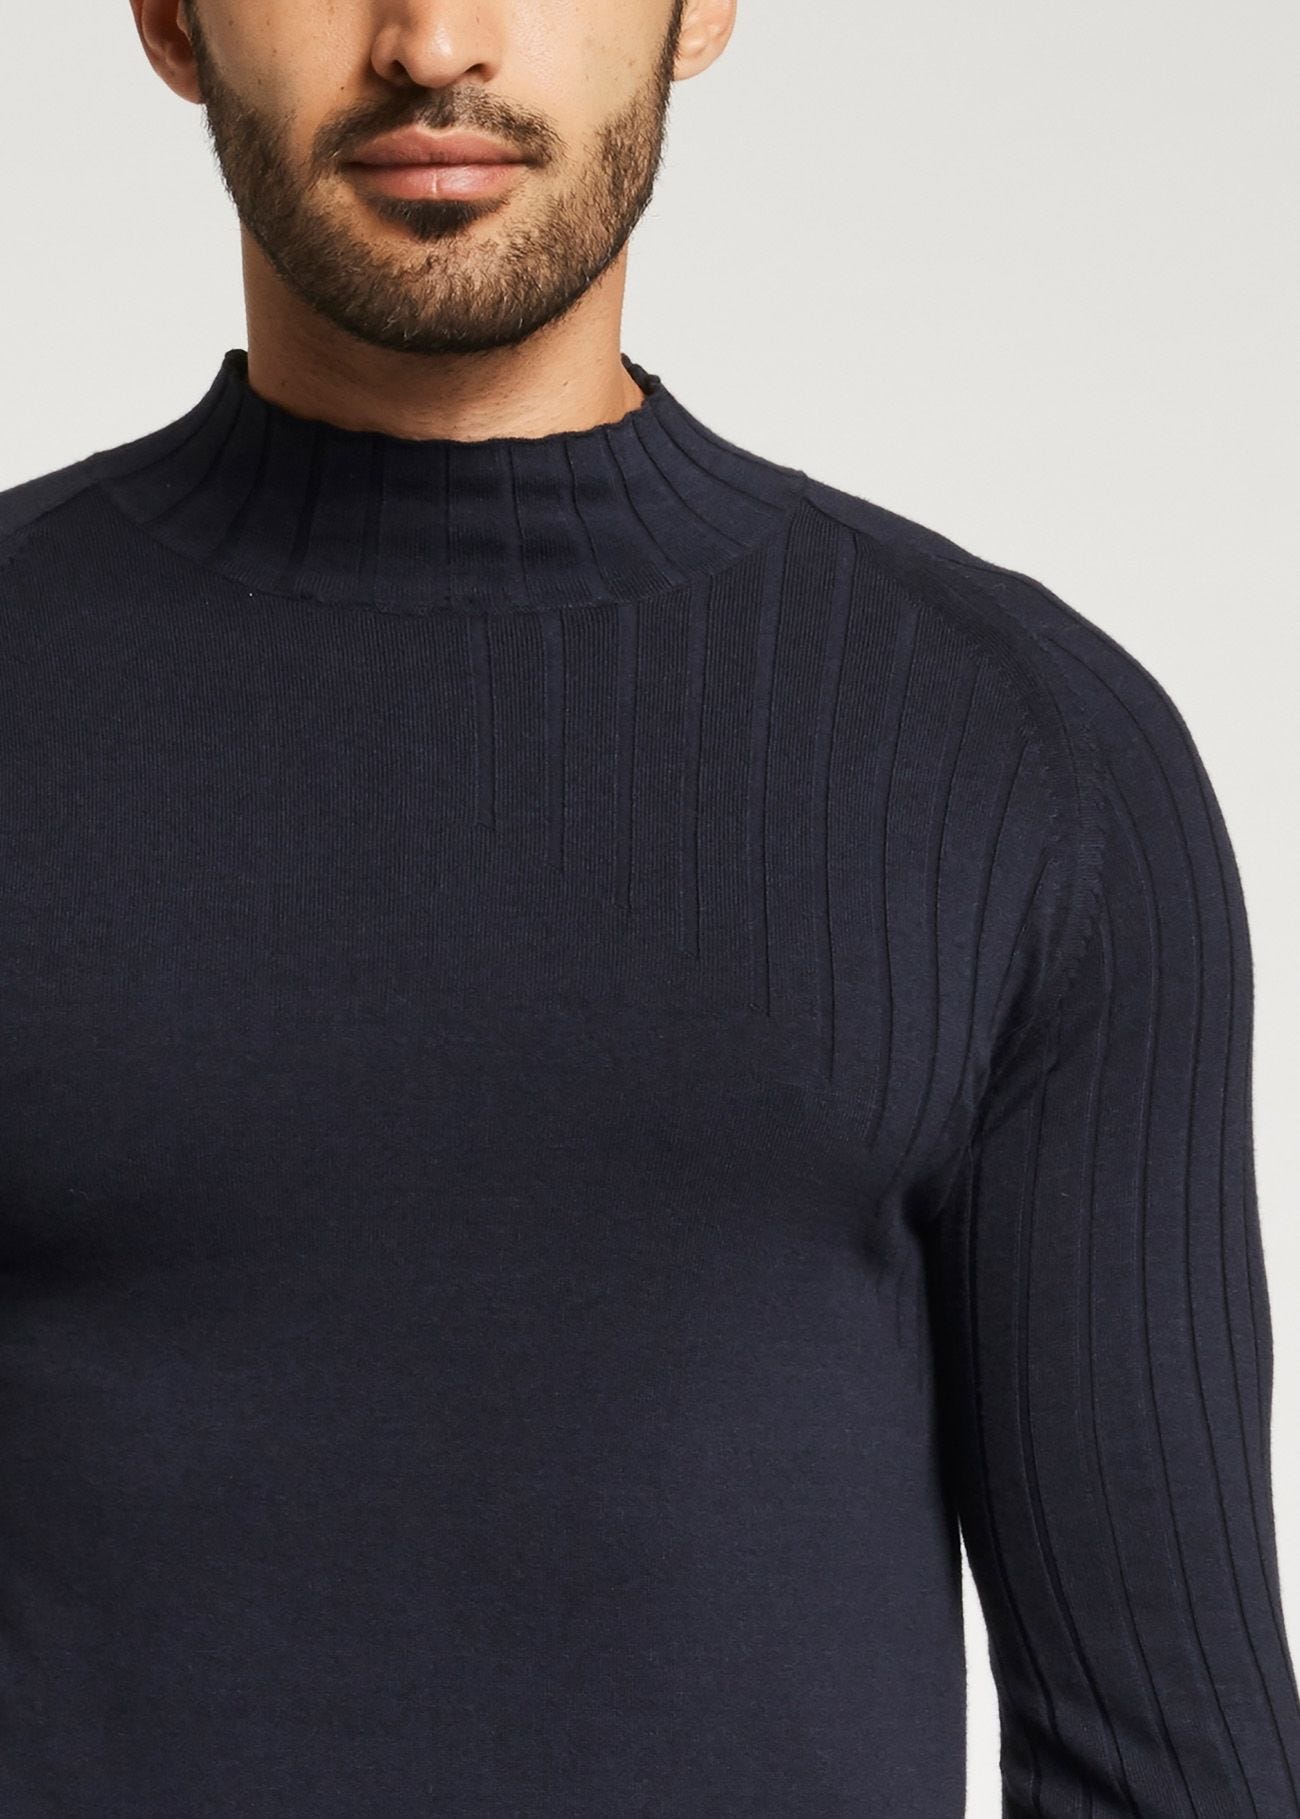 Jumper with funnel neck